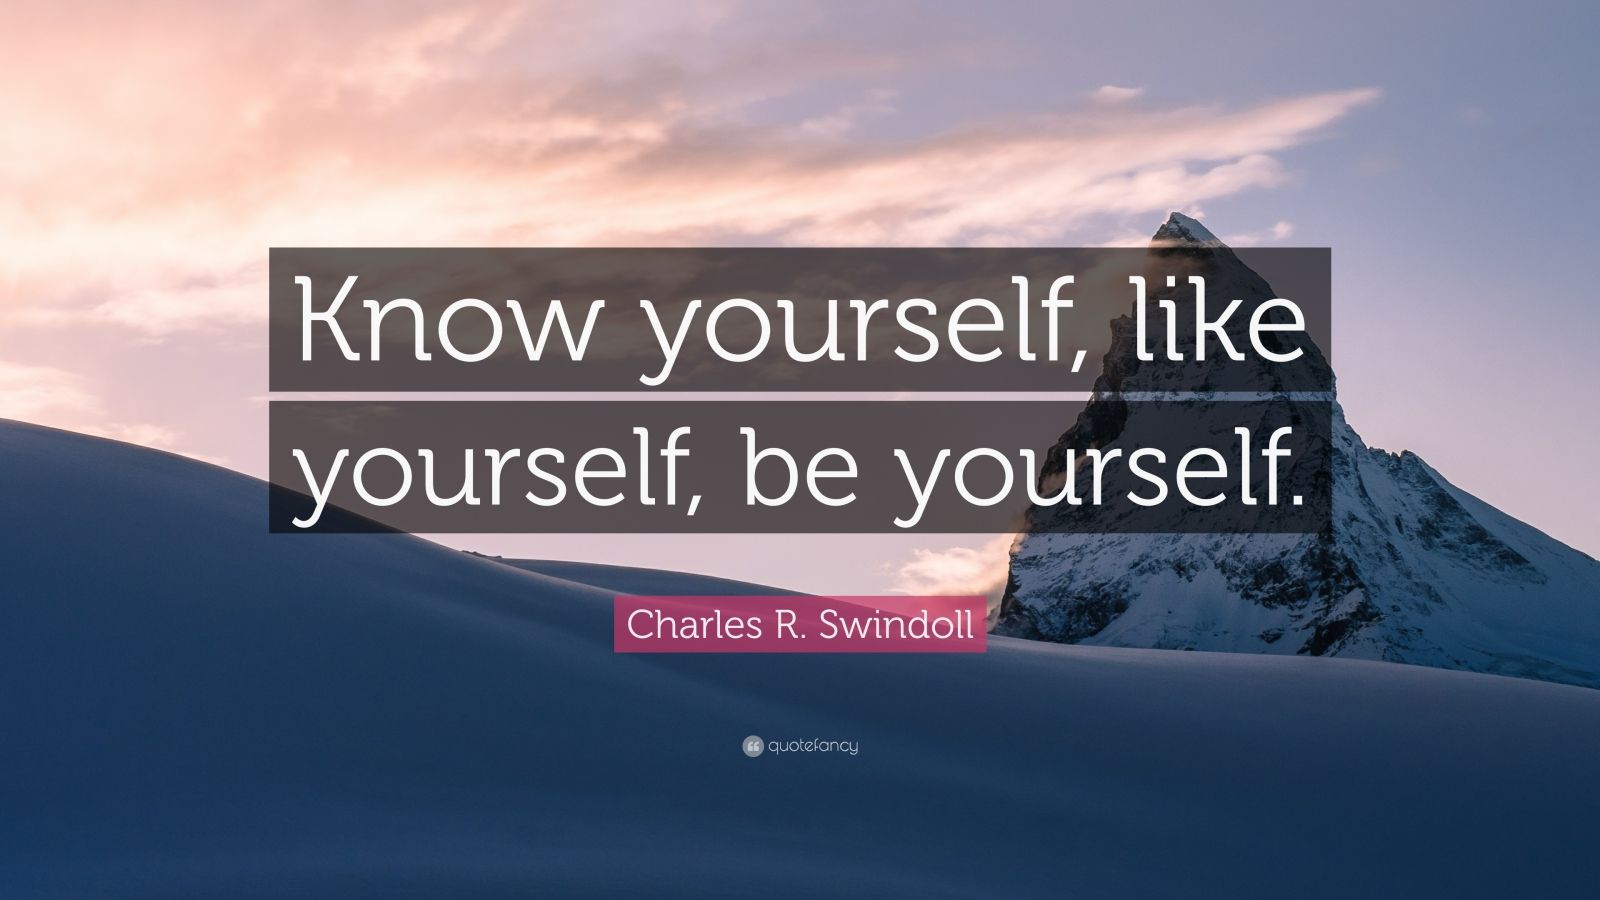 2529555 Charles R Swindoll Quote Know yourself like yourself be yourself